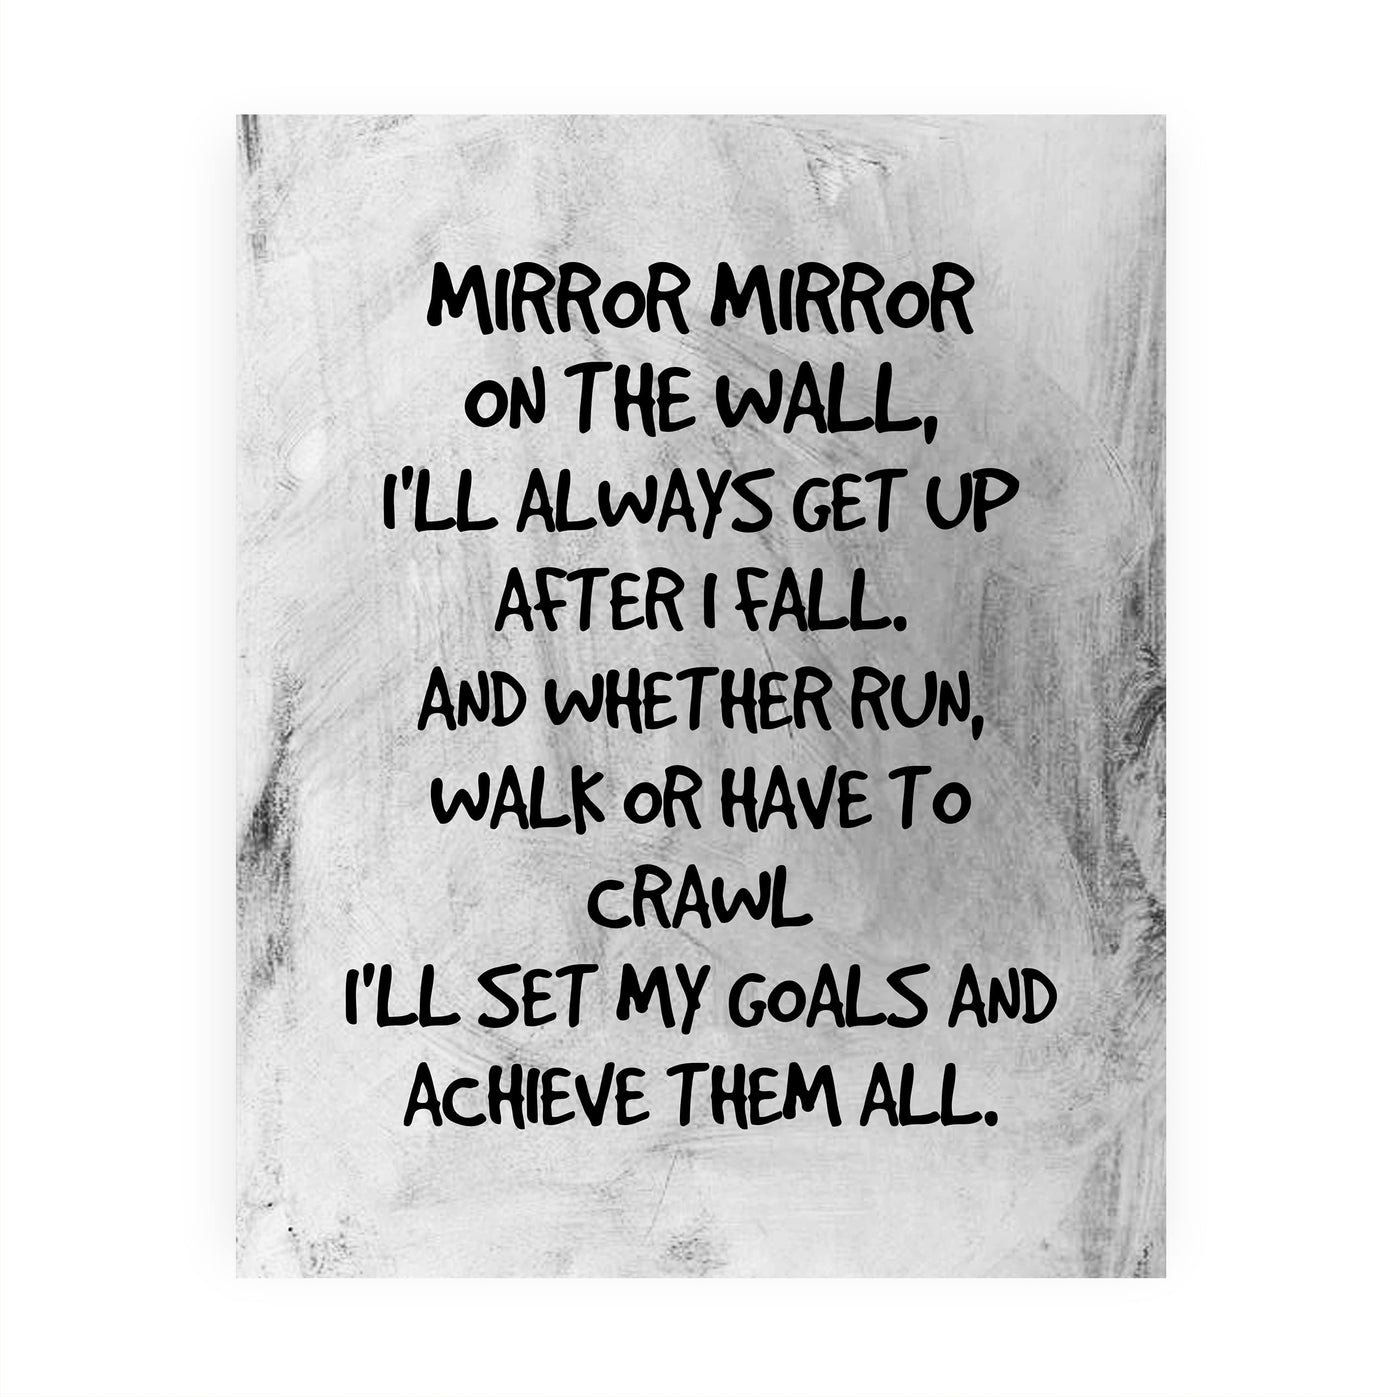 Mirror Mirror on the Wall-Set My Goals Achieve Them All Motivational Quotes Wall Art -8 x 10" Inspirational Poster Print -Ready to Frame. Distressed Decor for Home-Office-Classroom & Success!